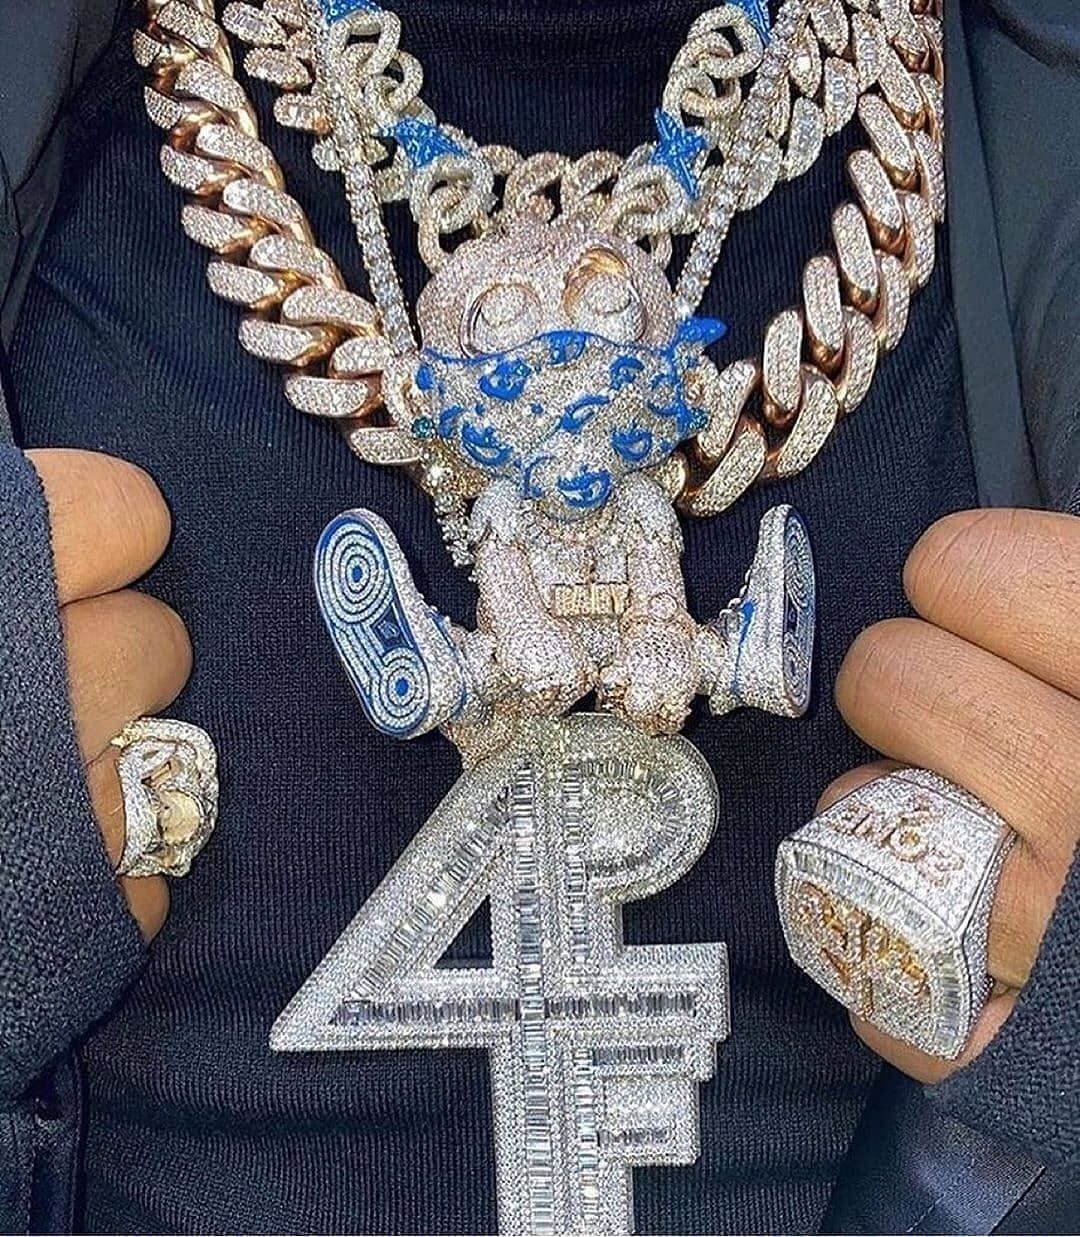 Almost all people who marvel at rap artists and their lifestyle always ask me a common question. And the question is Why Do Rappers Wear Chains?